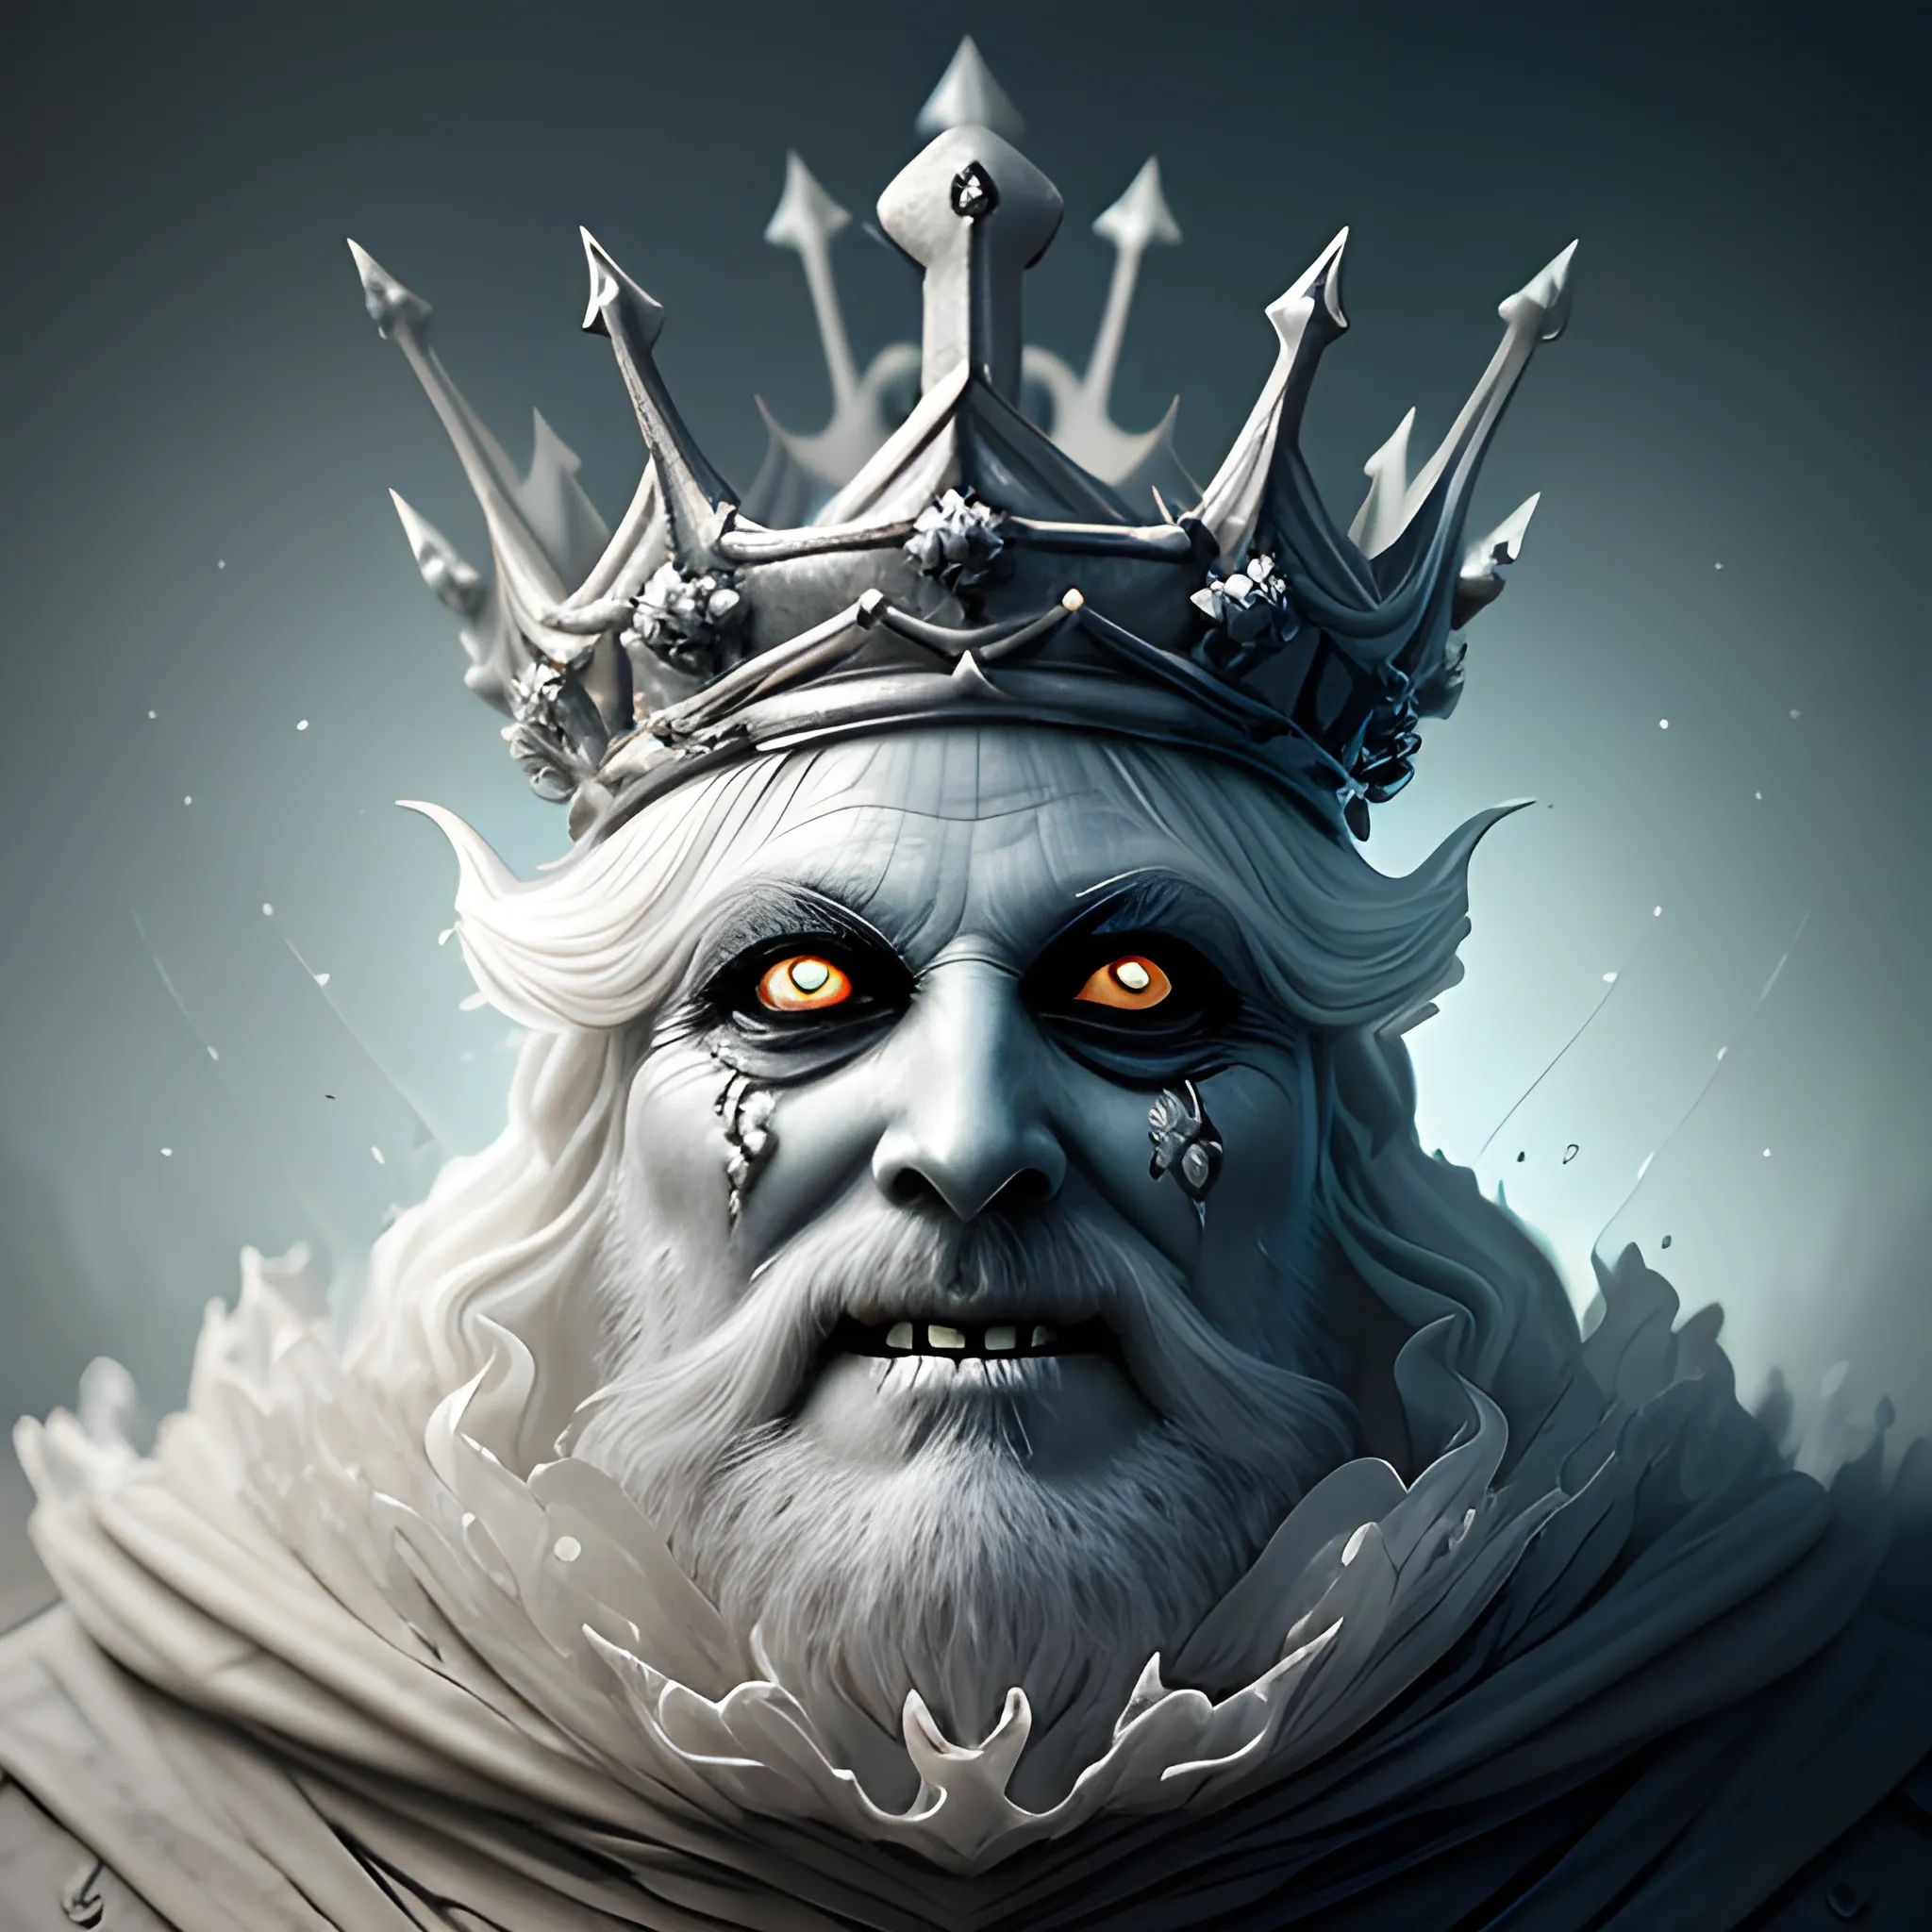 un-natural ghost king with a black pointed crown, creepy smile, ... -  Arthub.ai